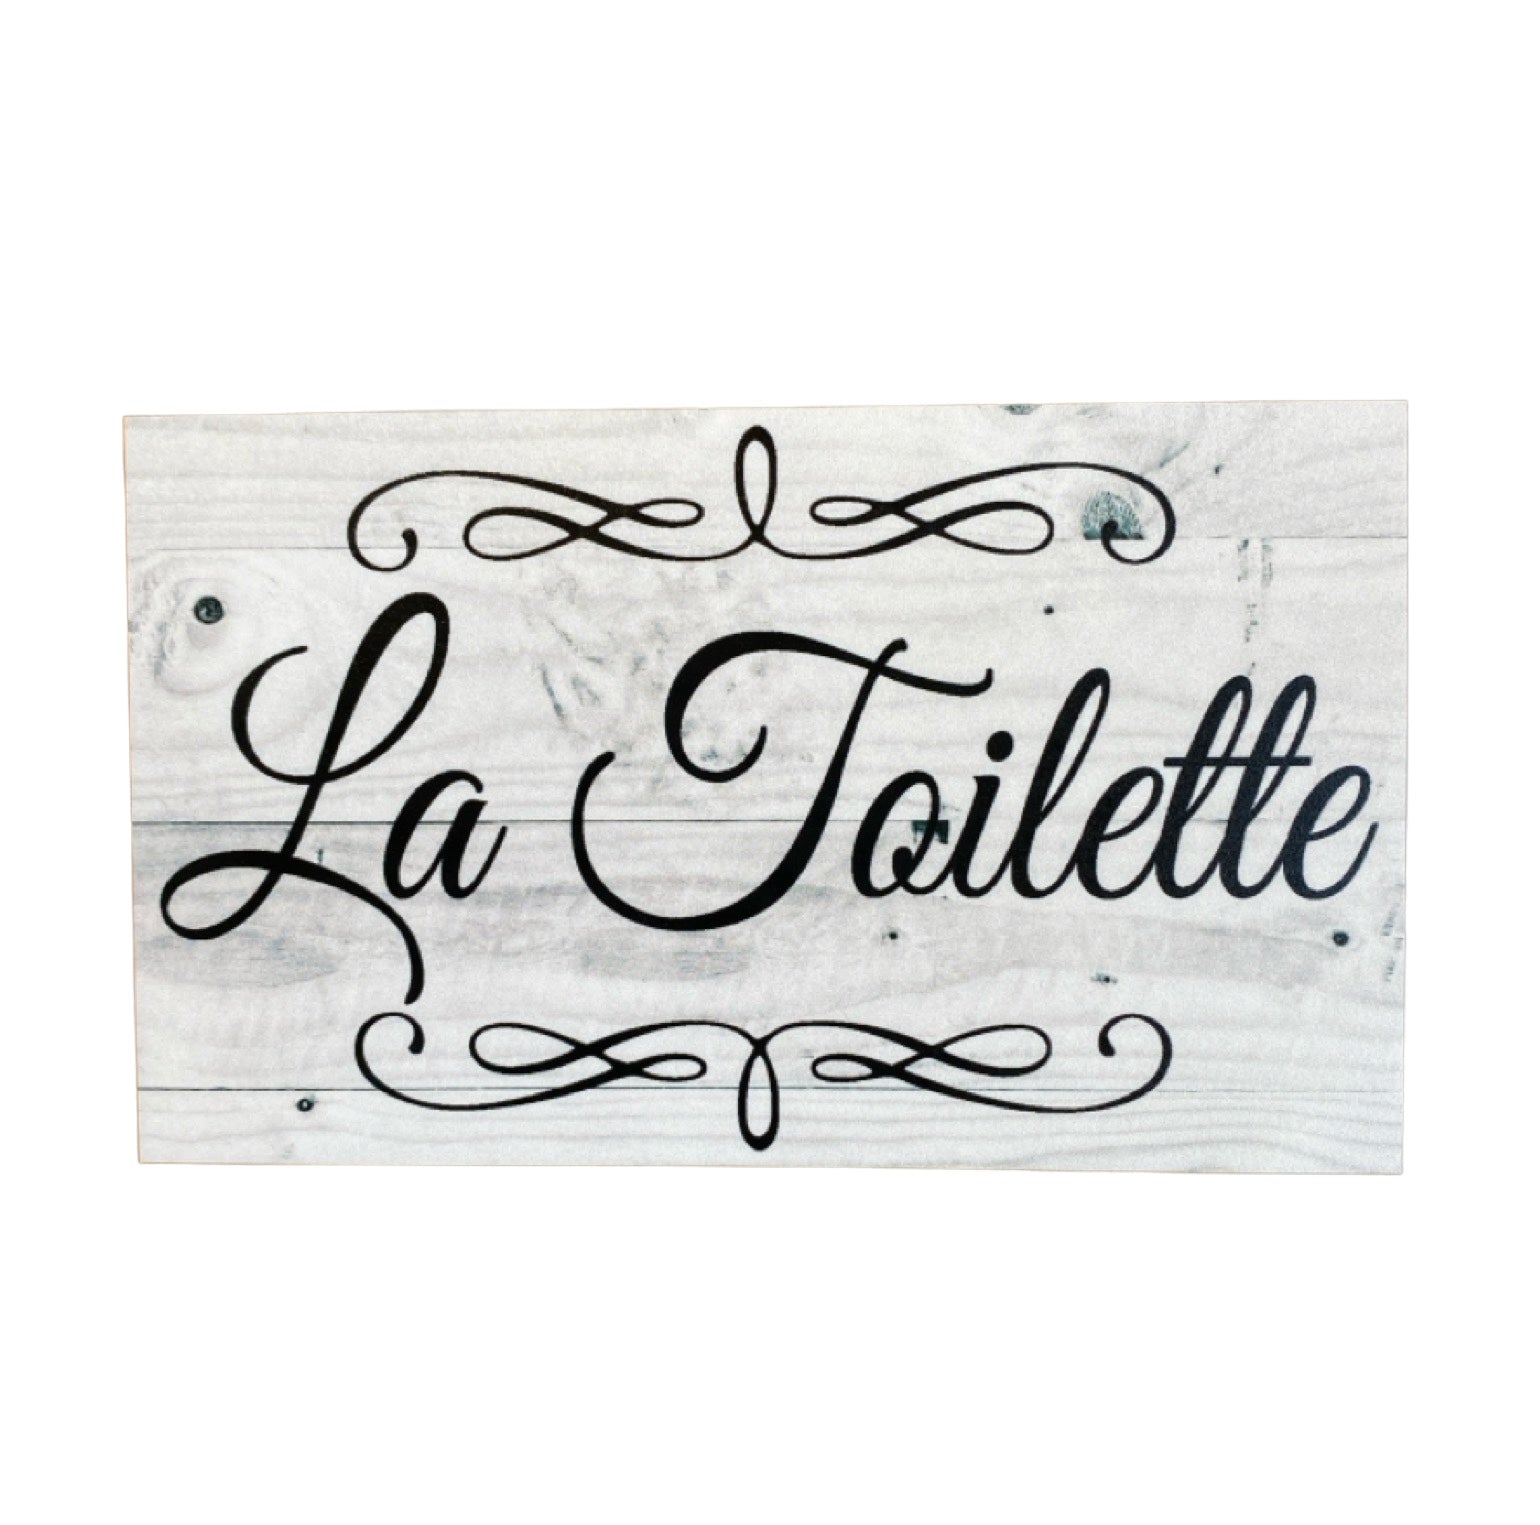 La Toilette Toilet Sign - The Renmy Store Homewares & Gifts 